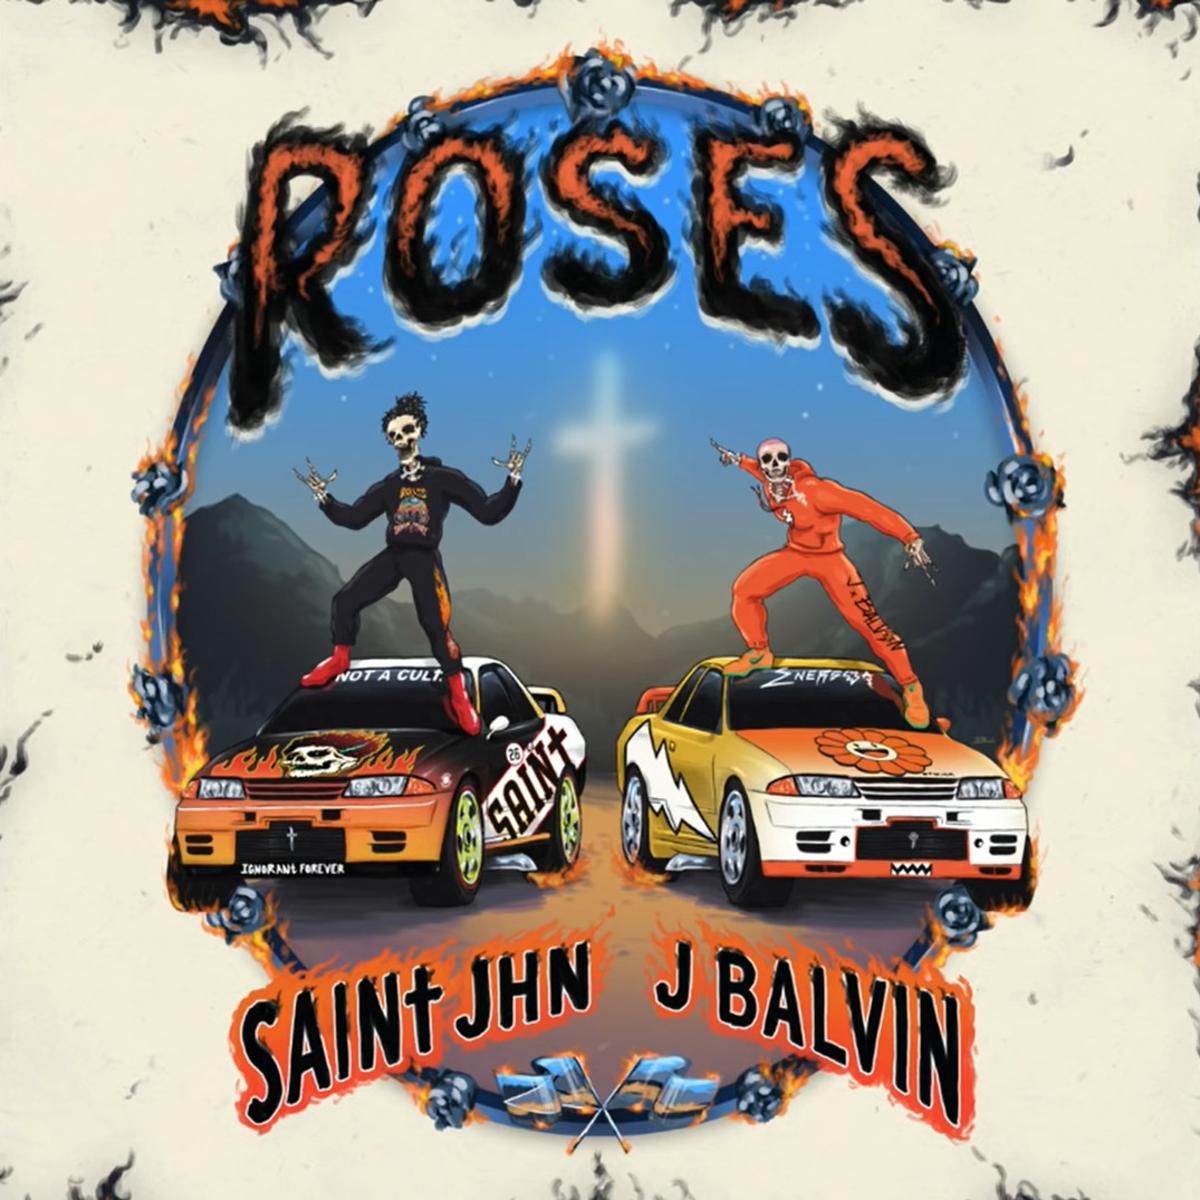 SAINt JHN Calls On J Balvin For A Remix To “Roses”